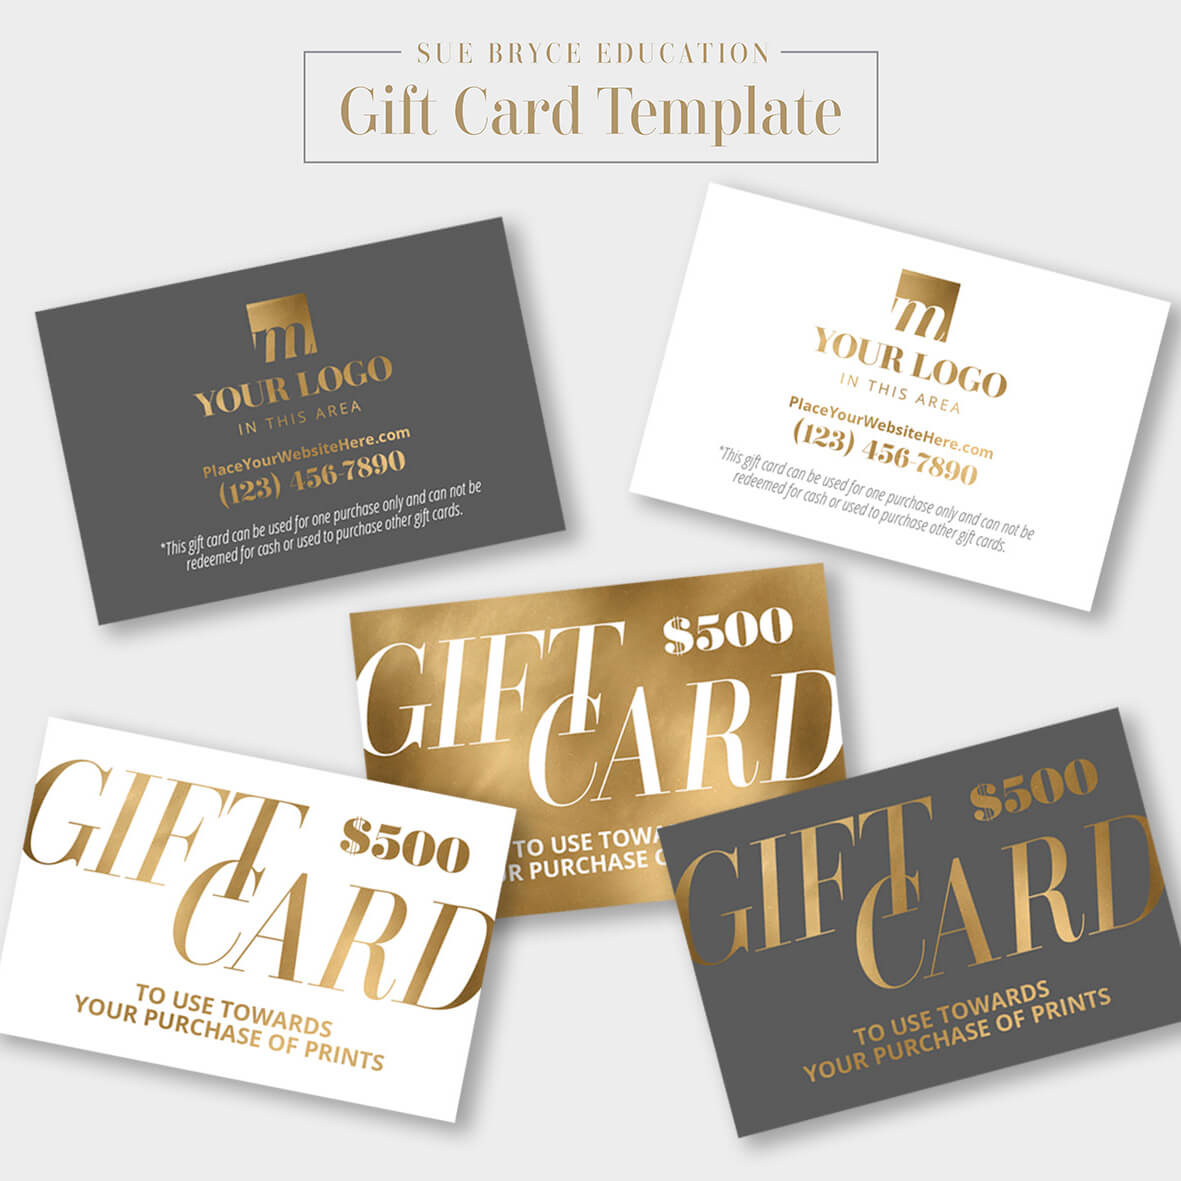 Gift Certificate Templates Indesign Illustrator Gift Coupon With Gift Card Template Illustrator